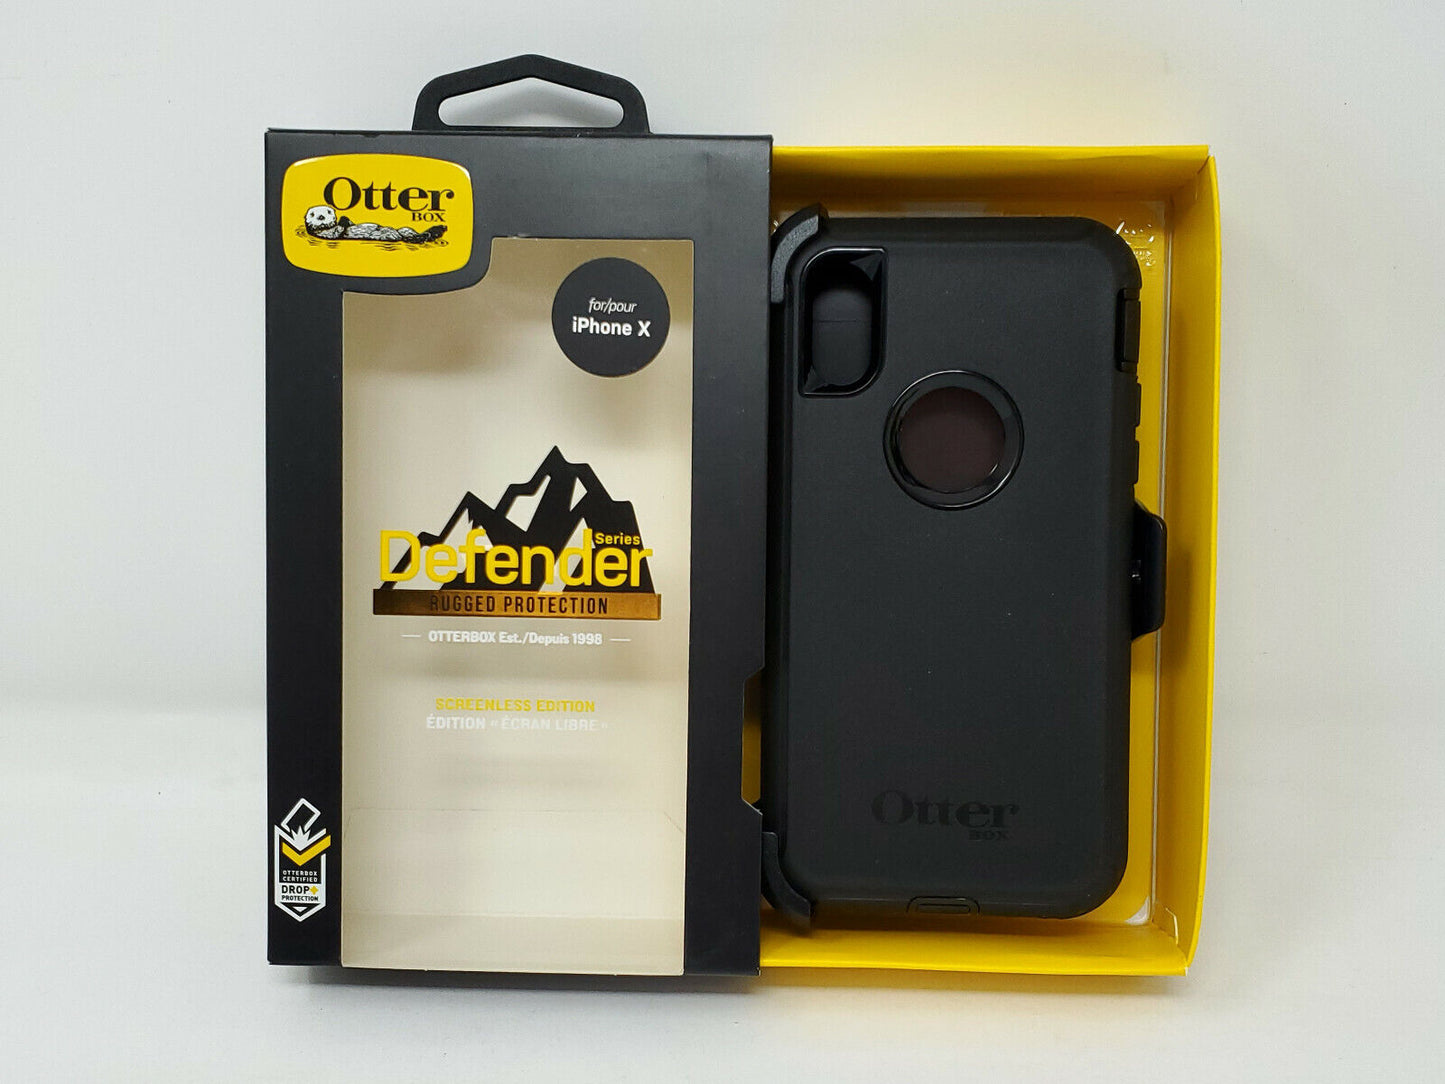 OtterBox Defender Series Screenless Edition for iPhone X Black - New Open Box